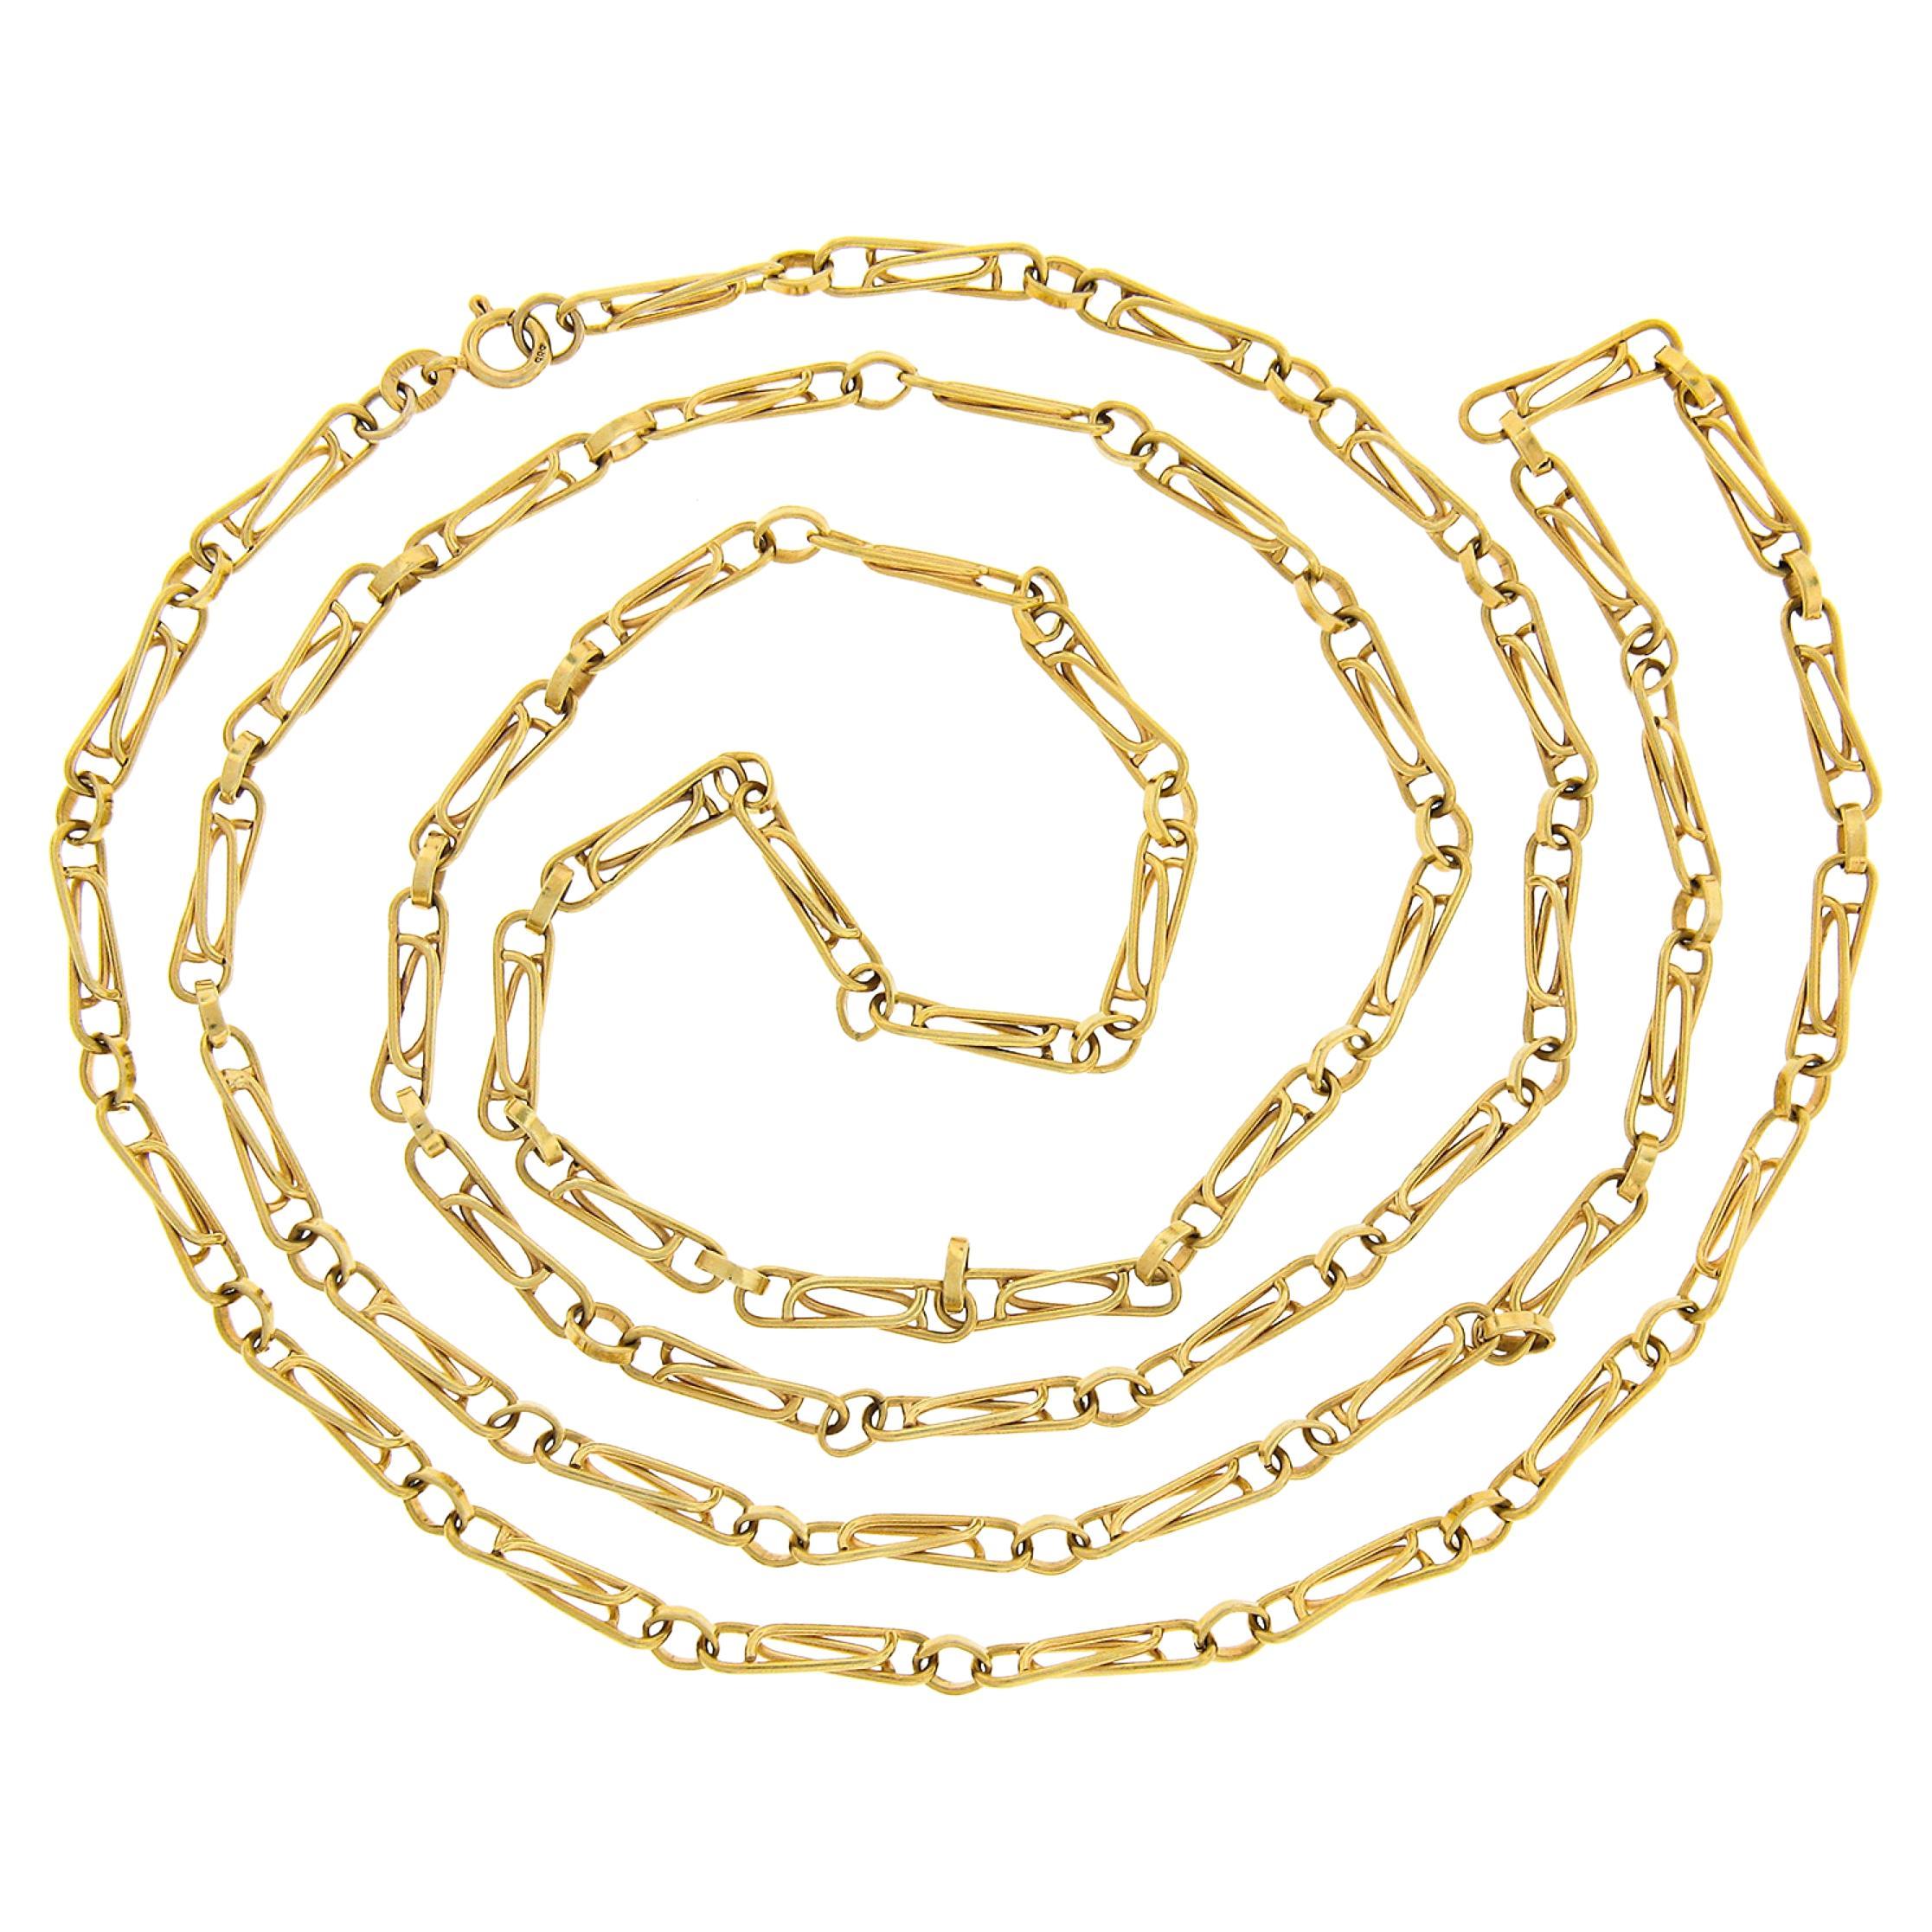 Vintage Italian 14k Gold 40" Long Interlocking Paperclip Link Chain Necklace For Sale